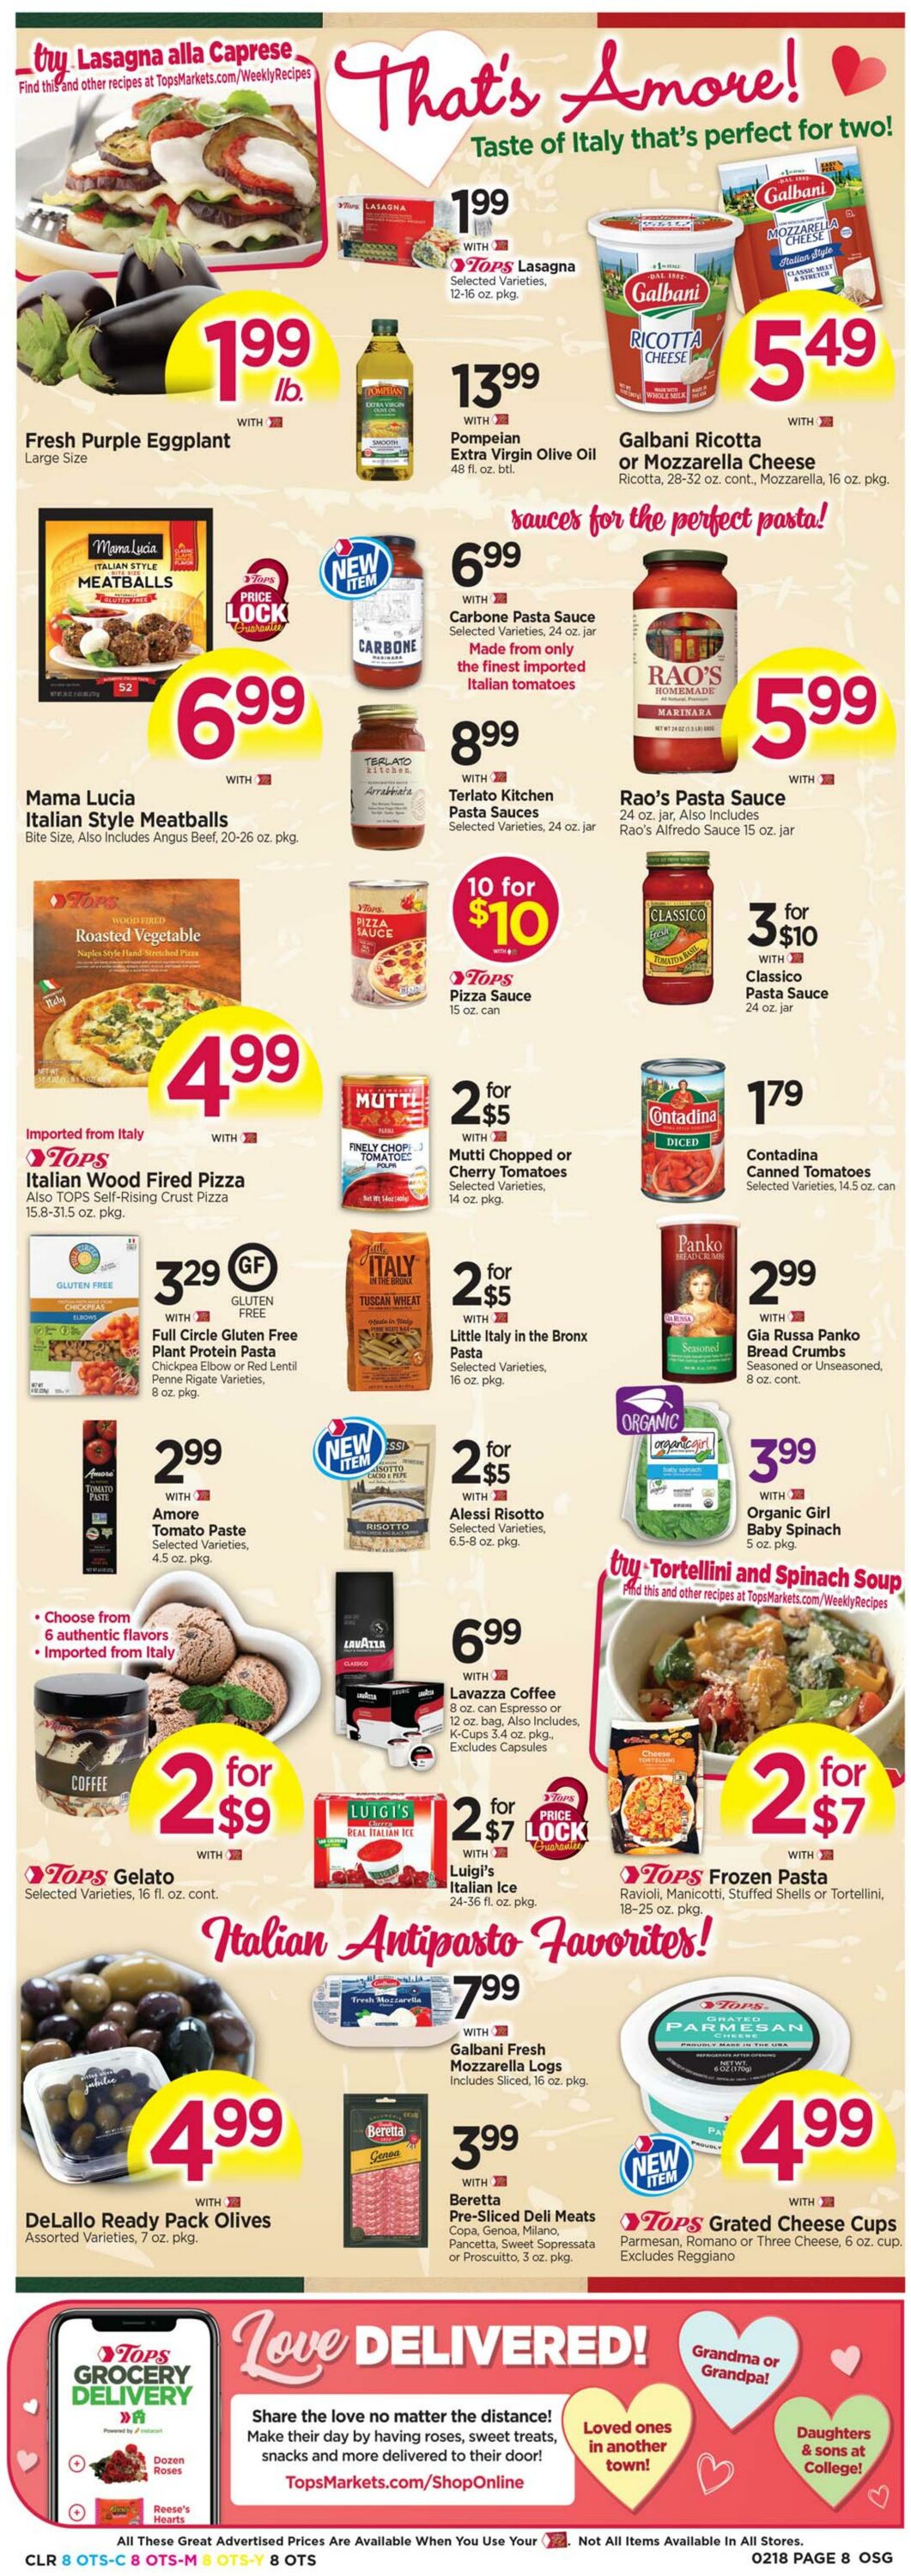 Weekly ad Tops Friendly Markets 02/12/2023 - 02/18/2023